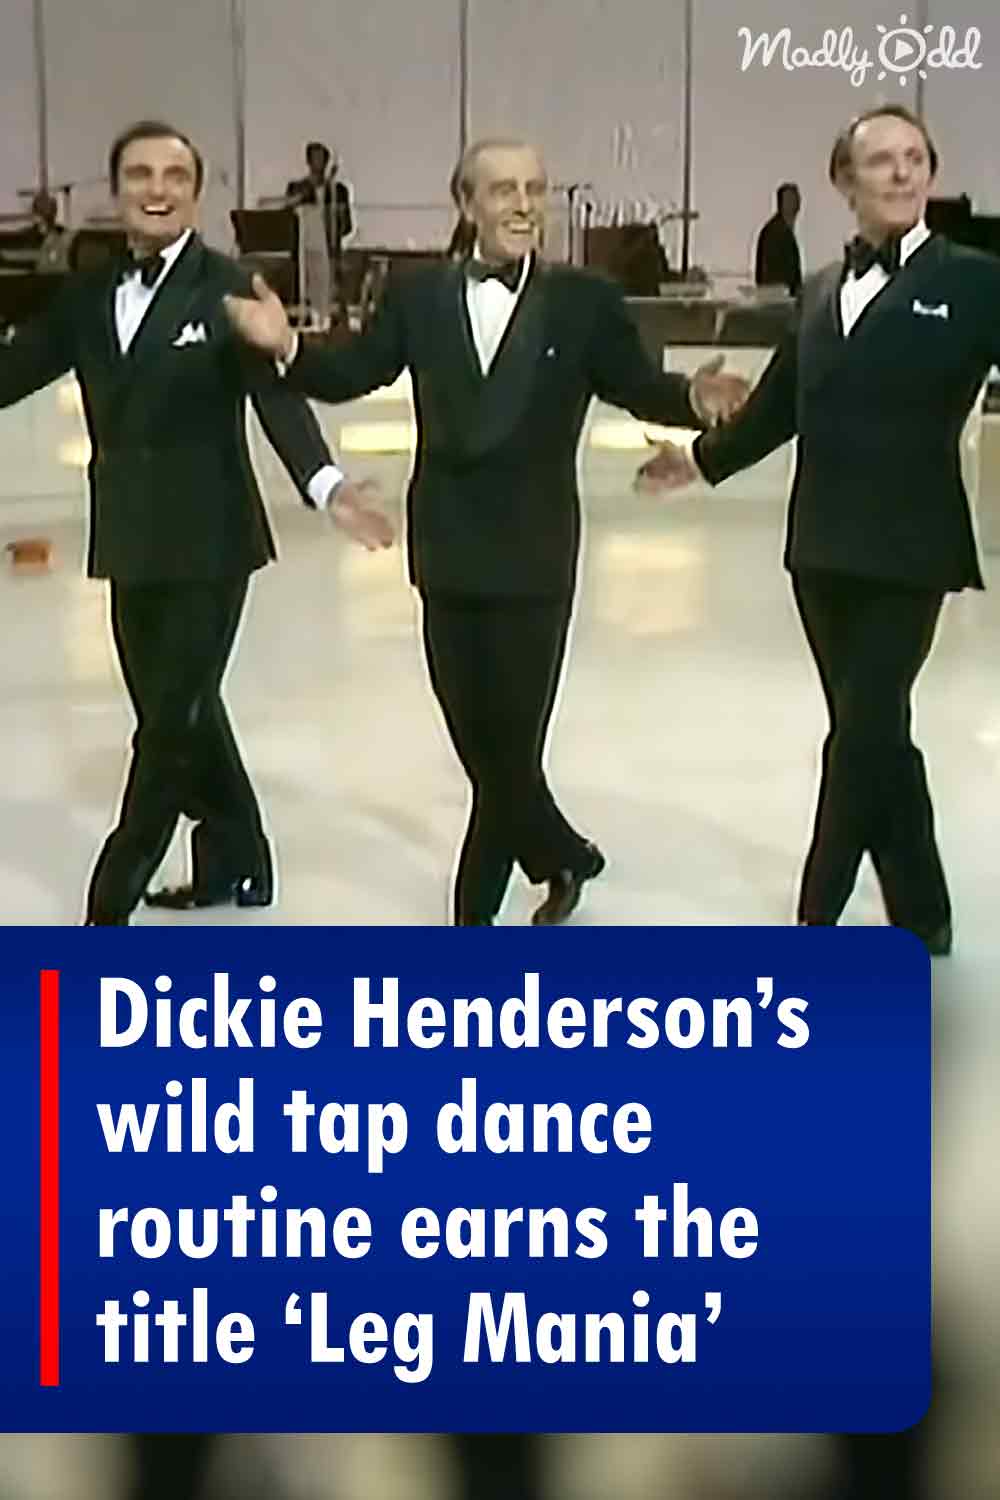 Dickie Henderson’s wild tap dance routine earns the title ‘Leg Mania’